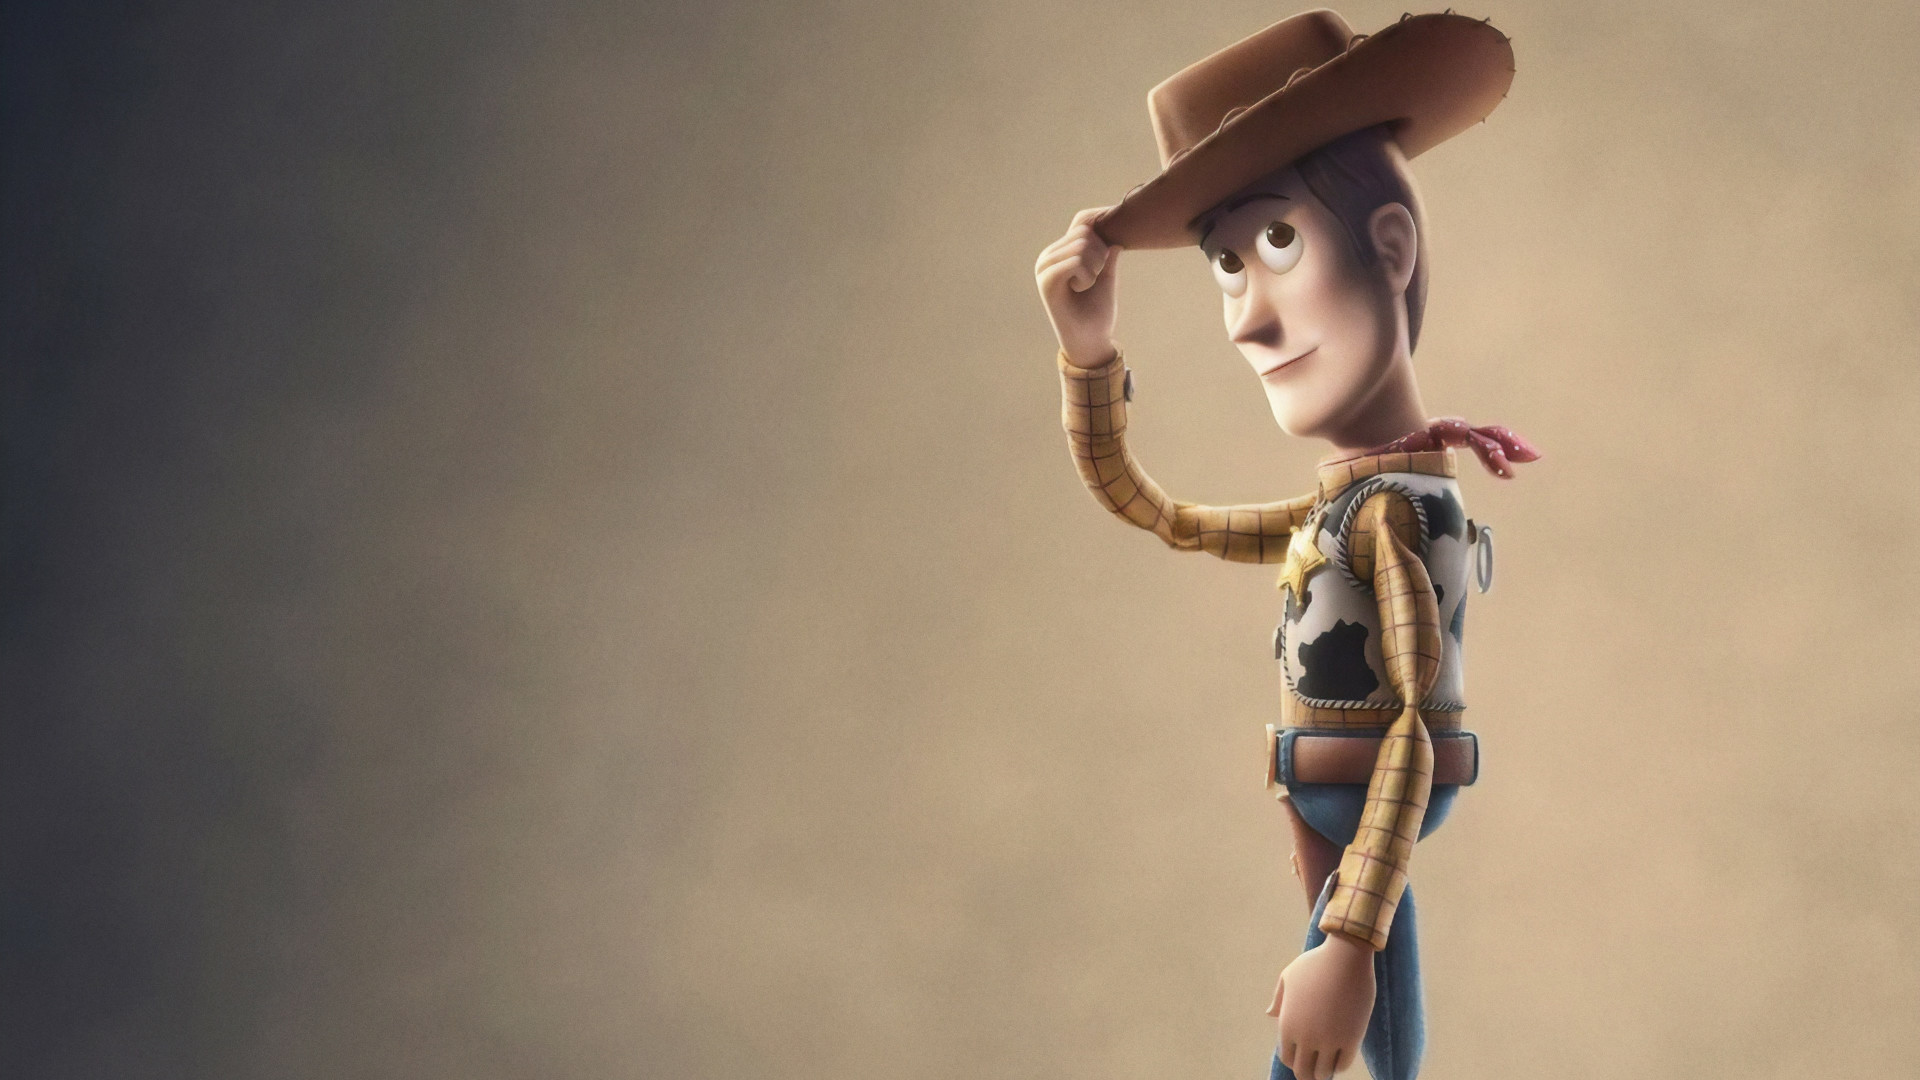 Toy Story 4 wallpaper 1920x1080